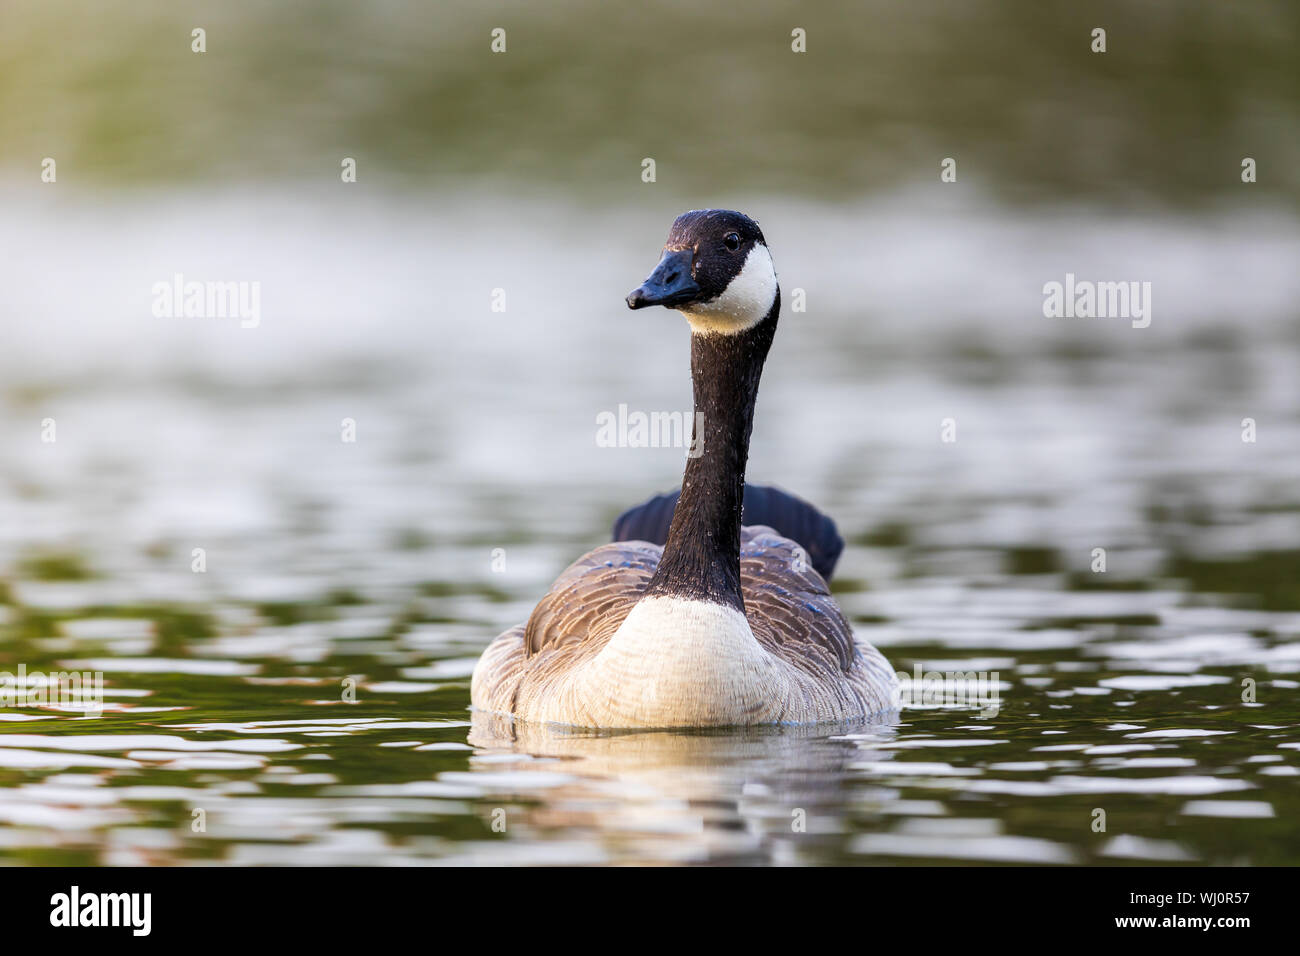 Canada goose Branta canadensis swimming in lake water, attentively observing the surroundings Stock Photo